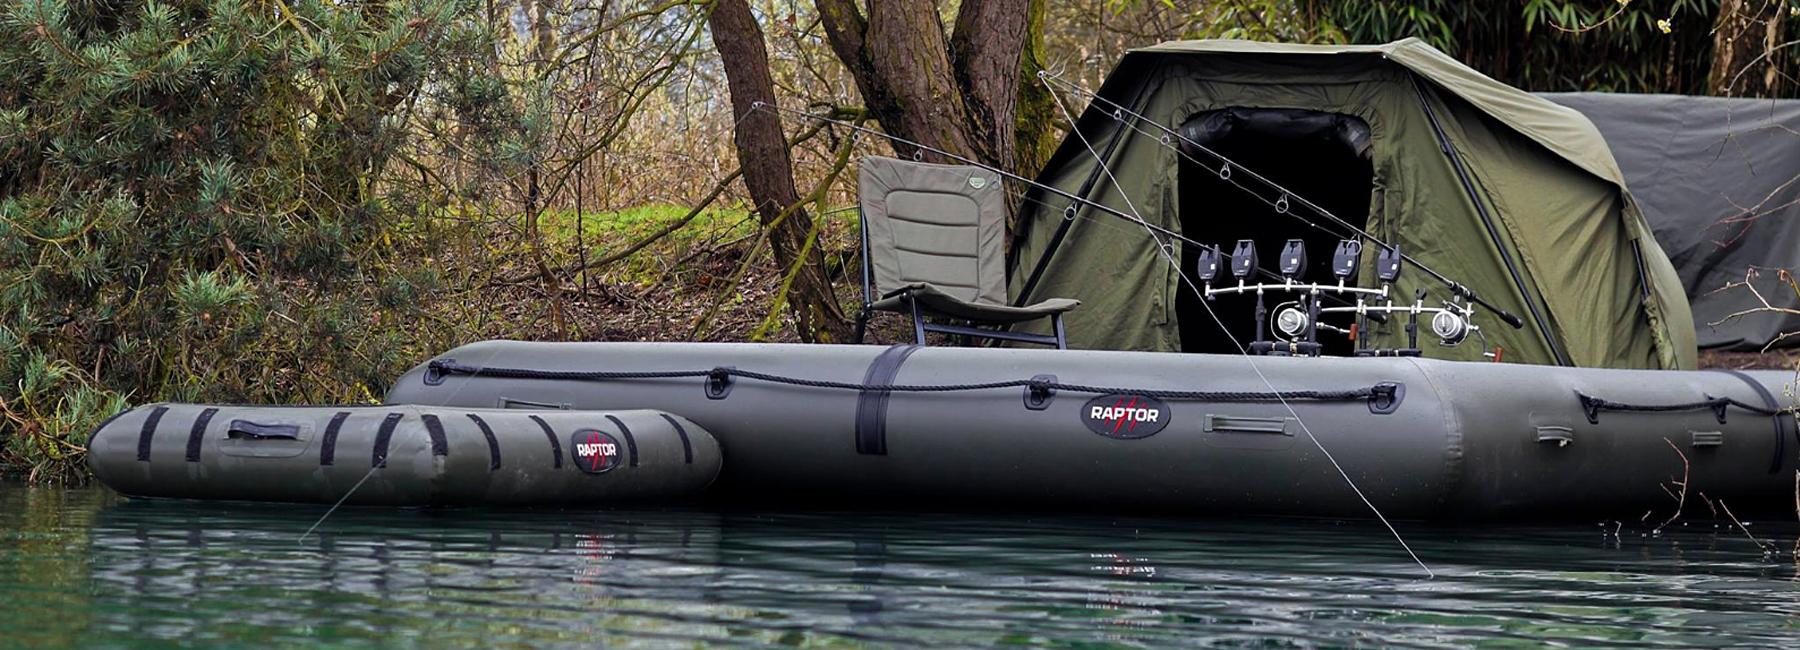 raptor boats fishing platform XL lets you pitch a tent in 